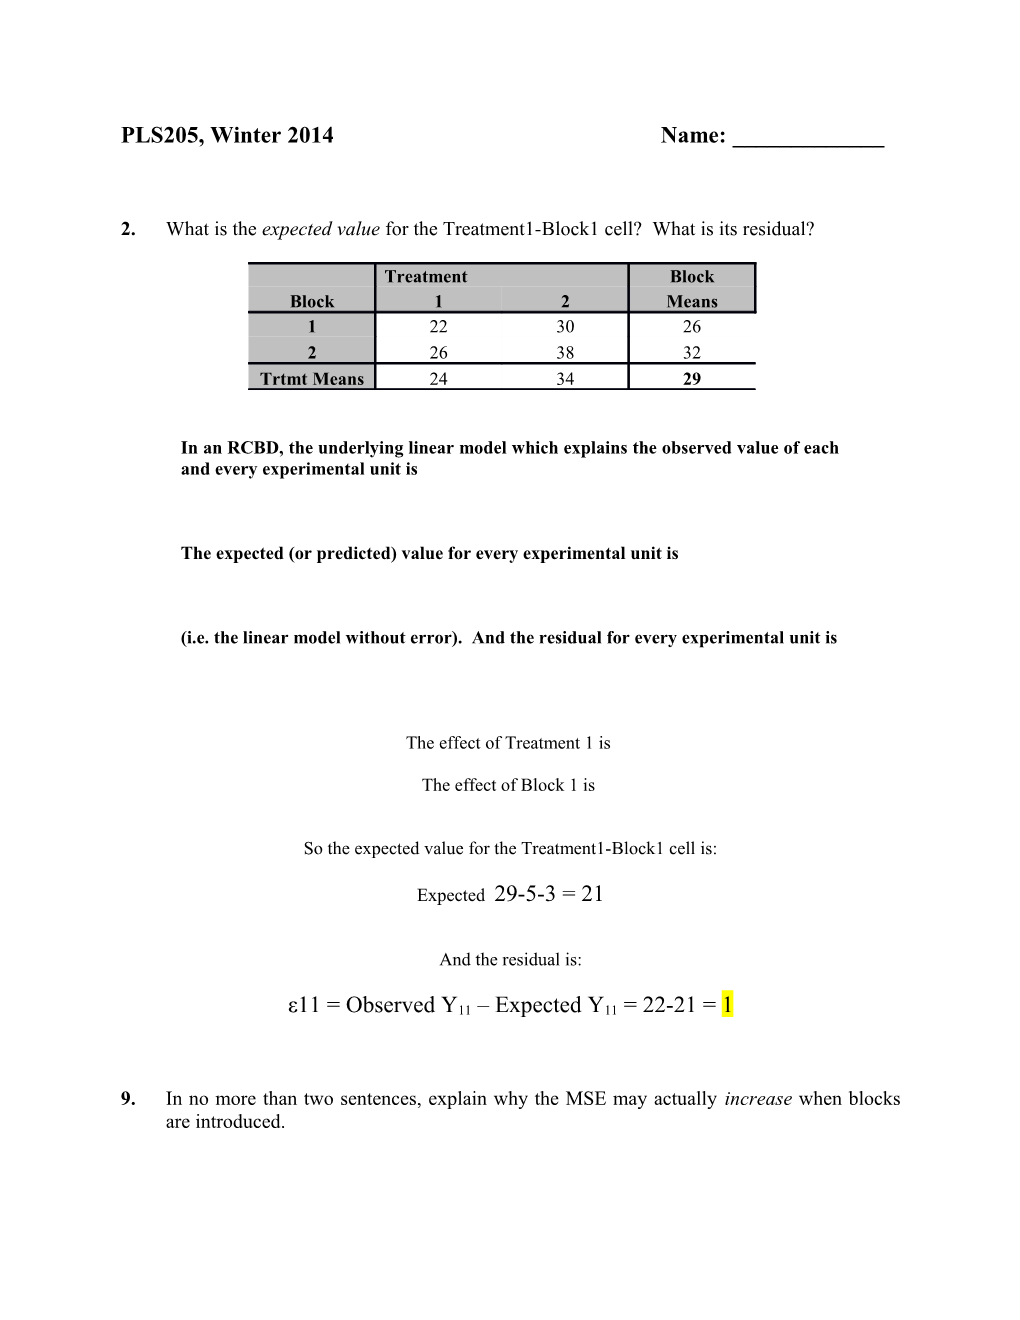 2.What Is the Expected Value for the Treatment1-Block1 Cell? What Is Its Residual?